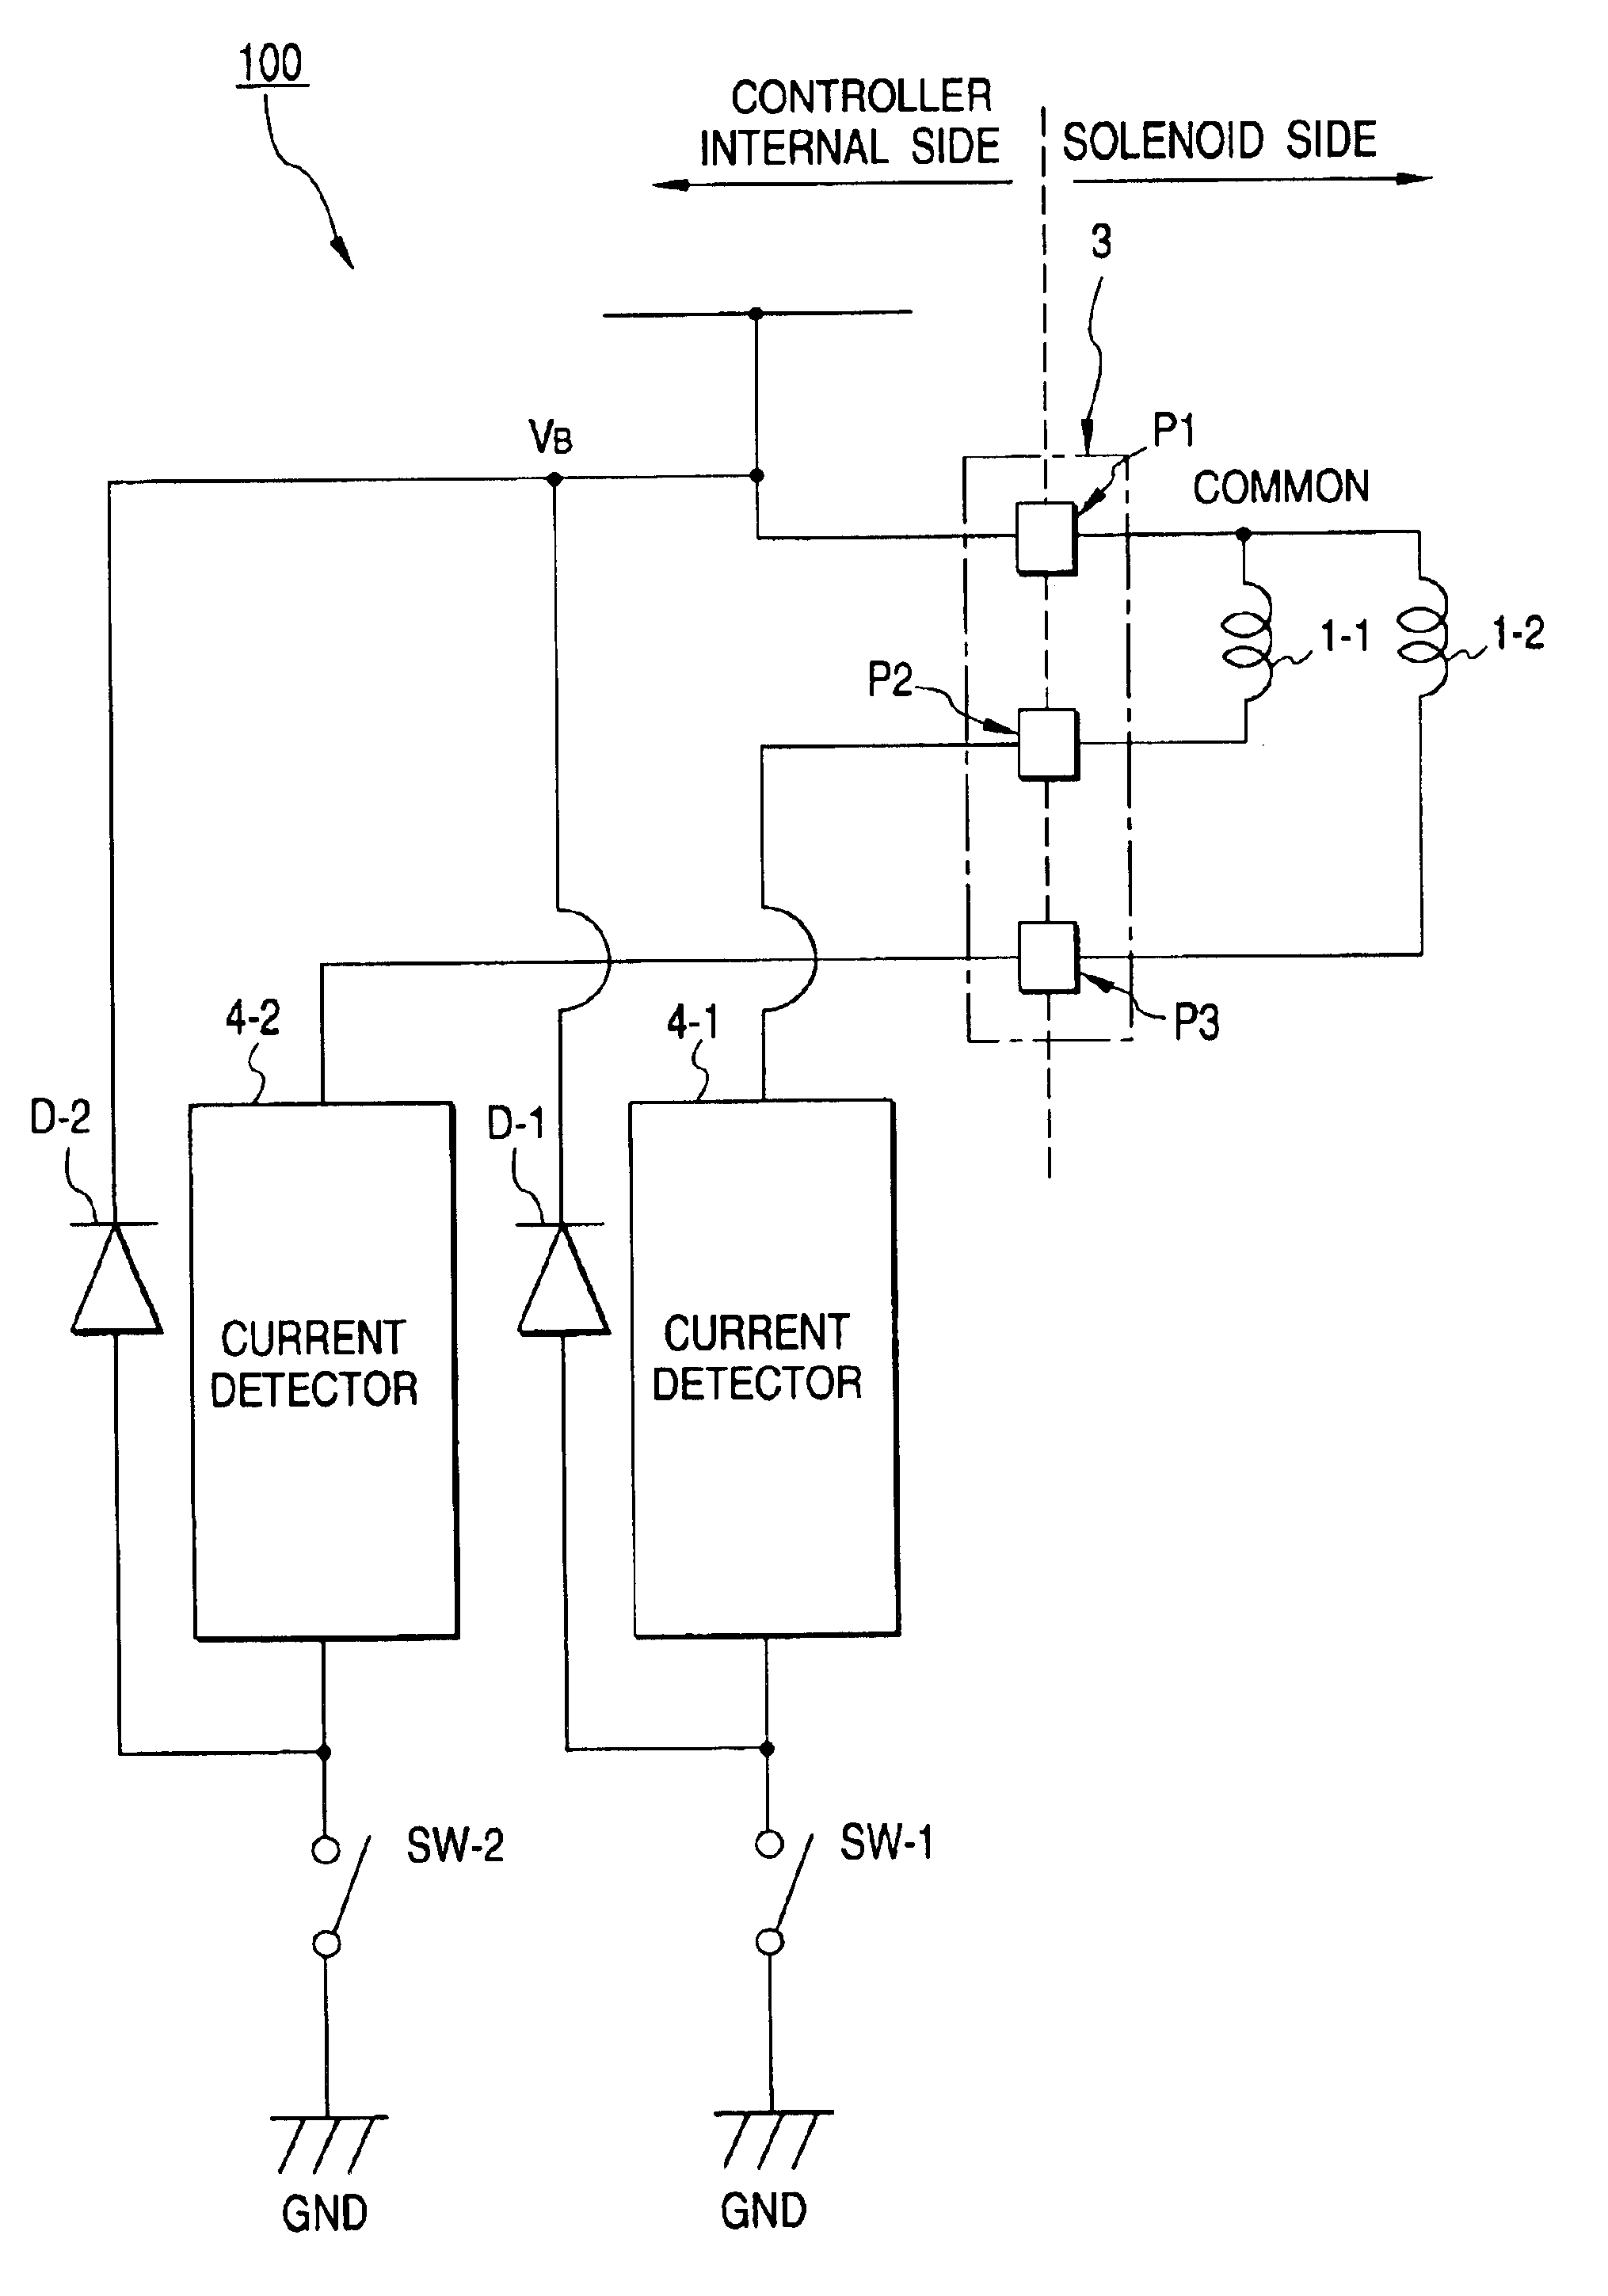 Solenoid driving device